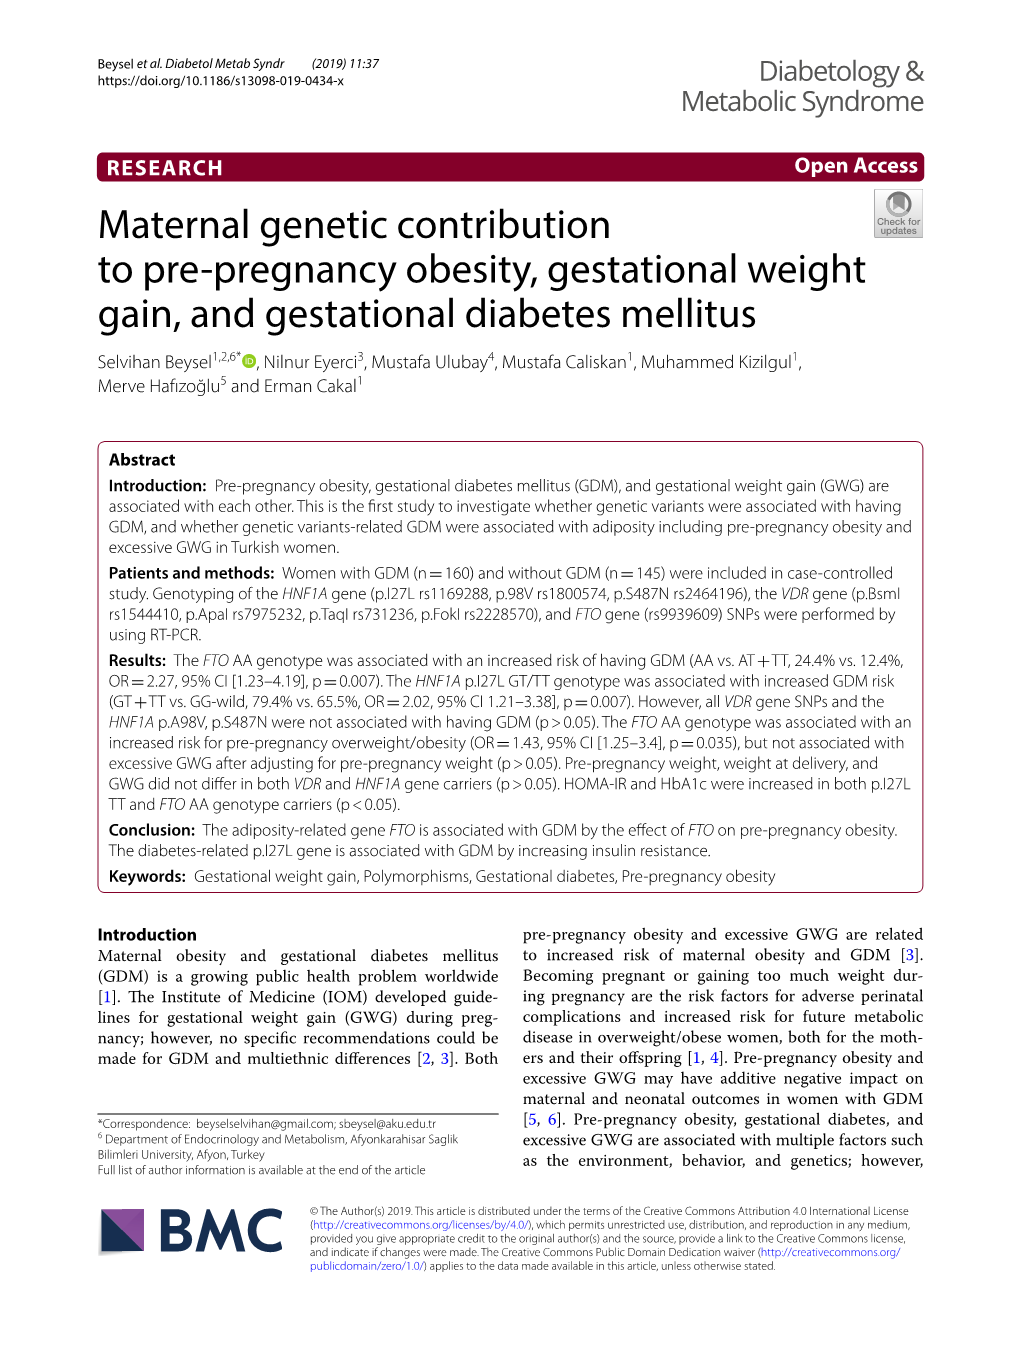 Maternal Genetic Contribution to Pre-Pregnancy Obesity, Gestational